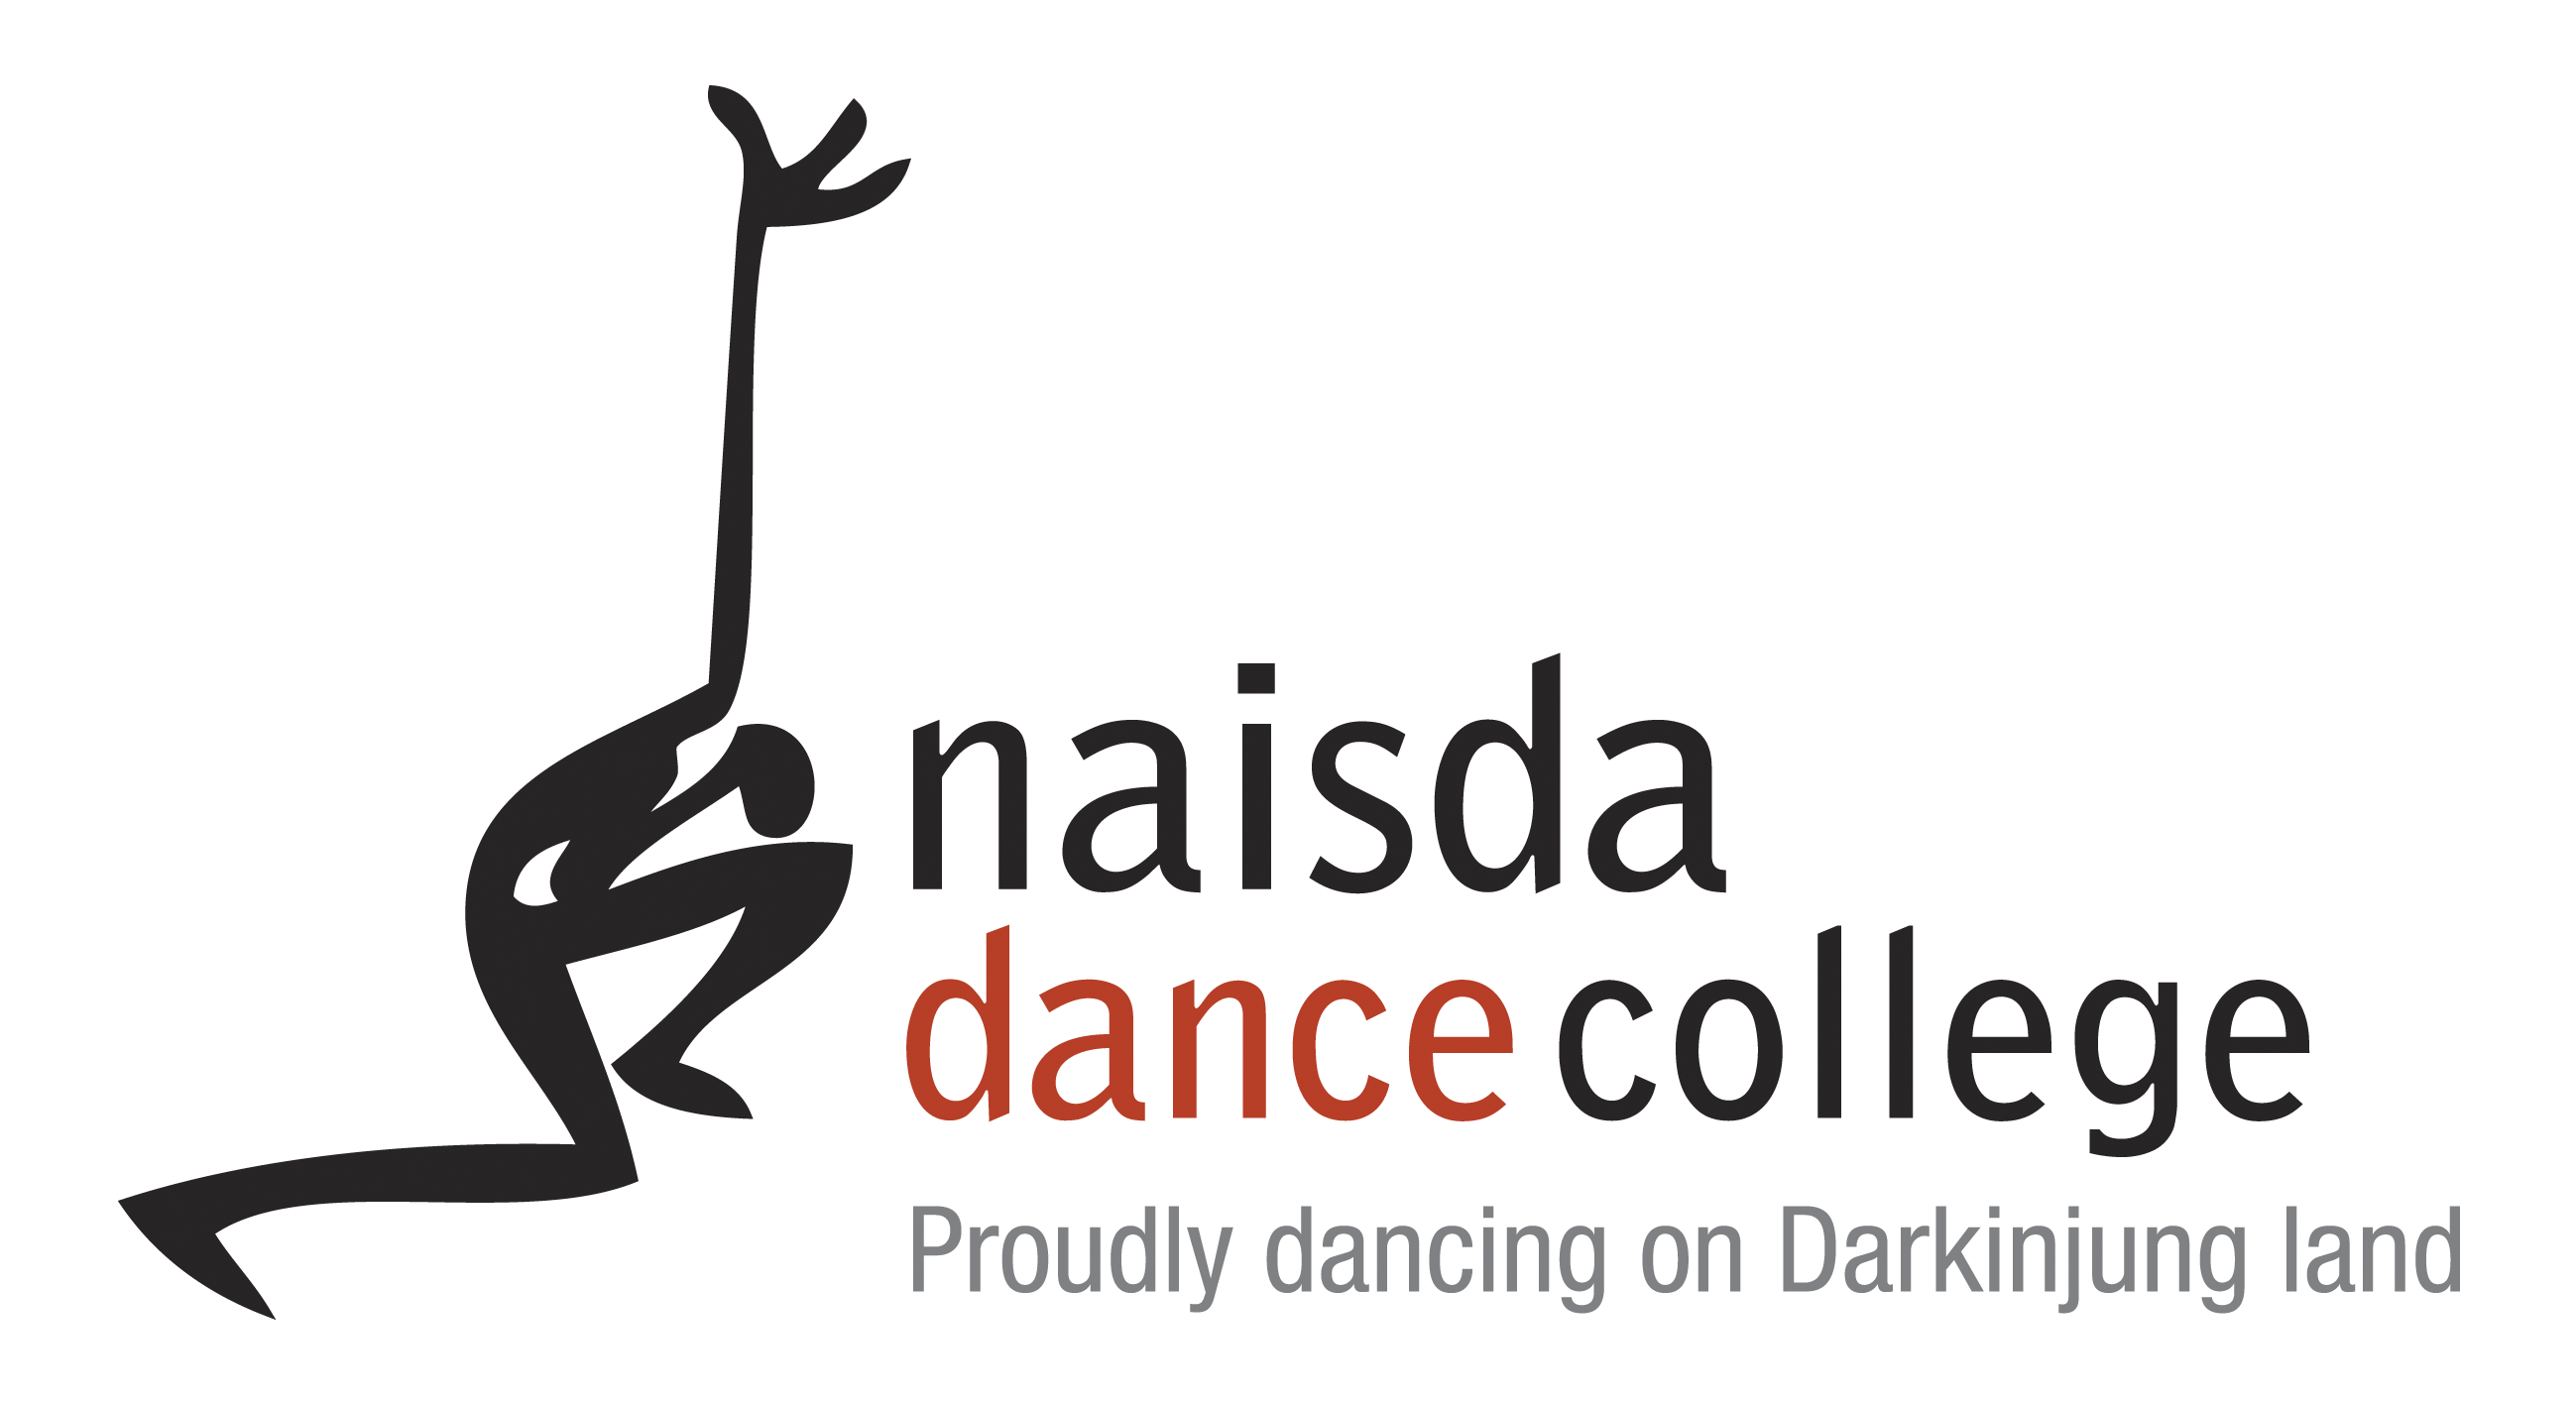 The logo for Naisda Dance College. On the left is a simple black illustration of a body in a dynamic position with one arm stretched upwards. On the right is lettering reading naisda dance college proudly dancing on Darkinjung land